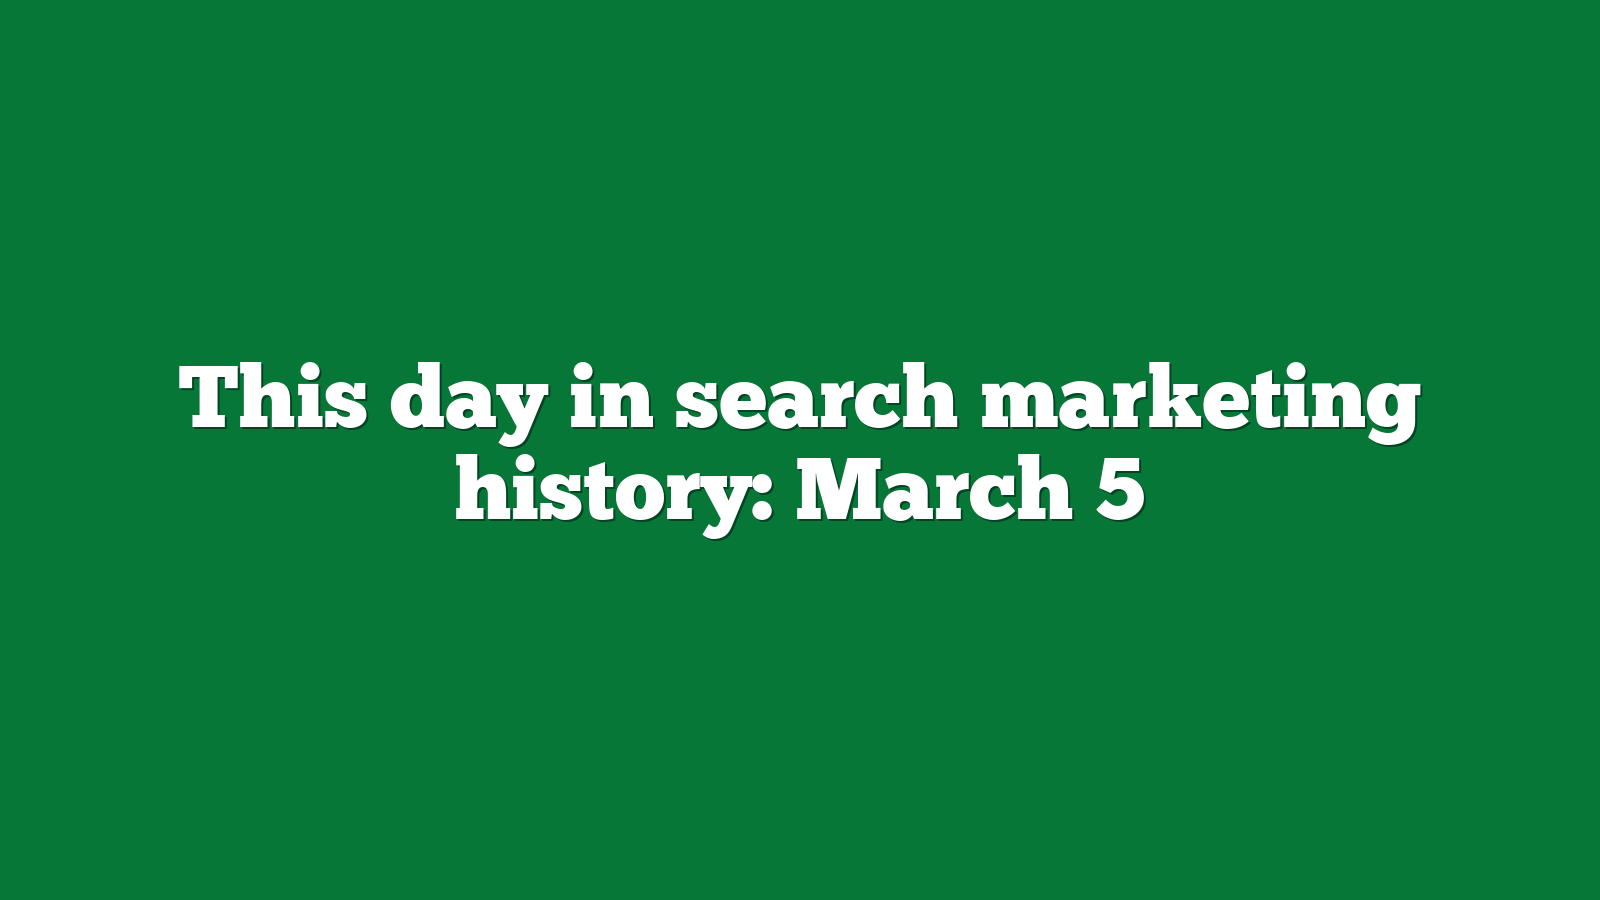 This day in search marketing history: March 5